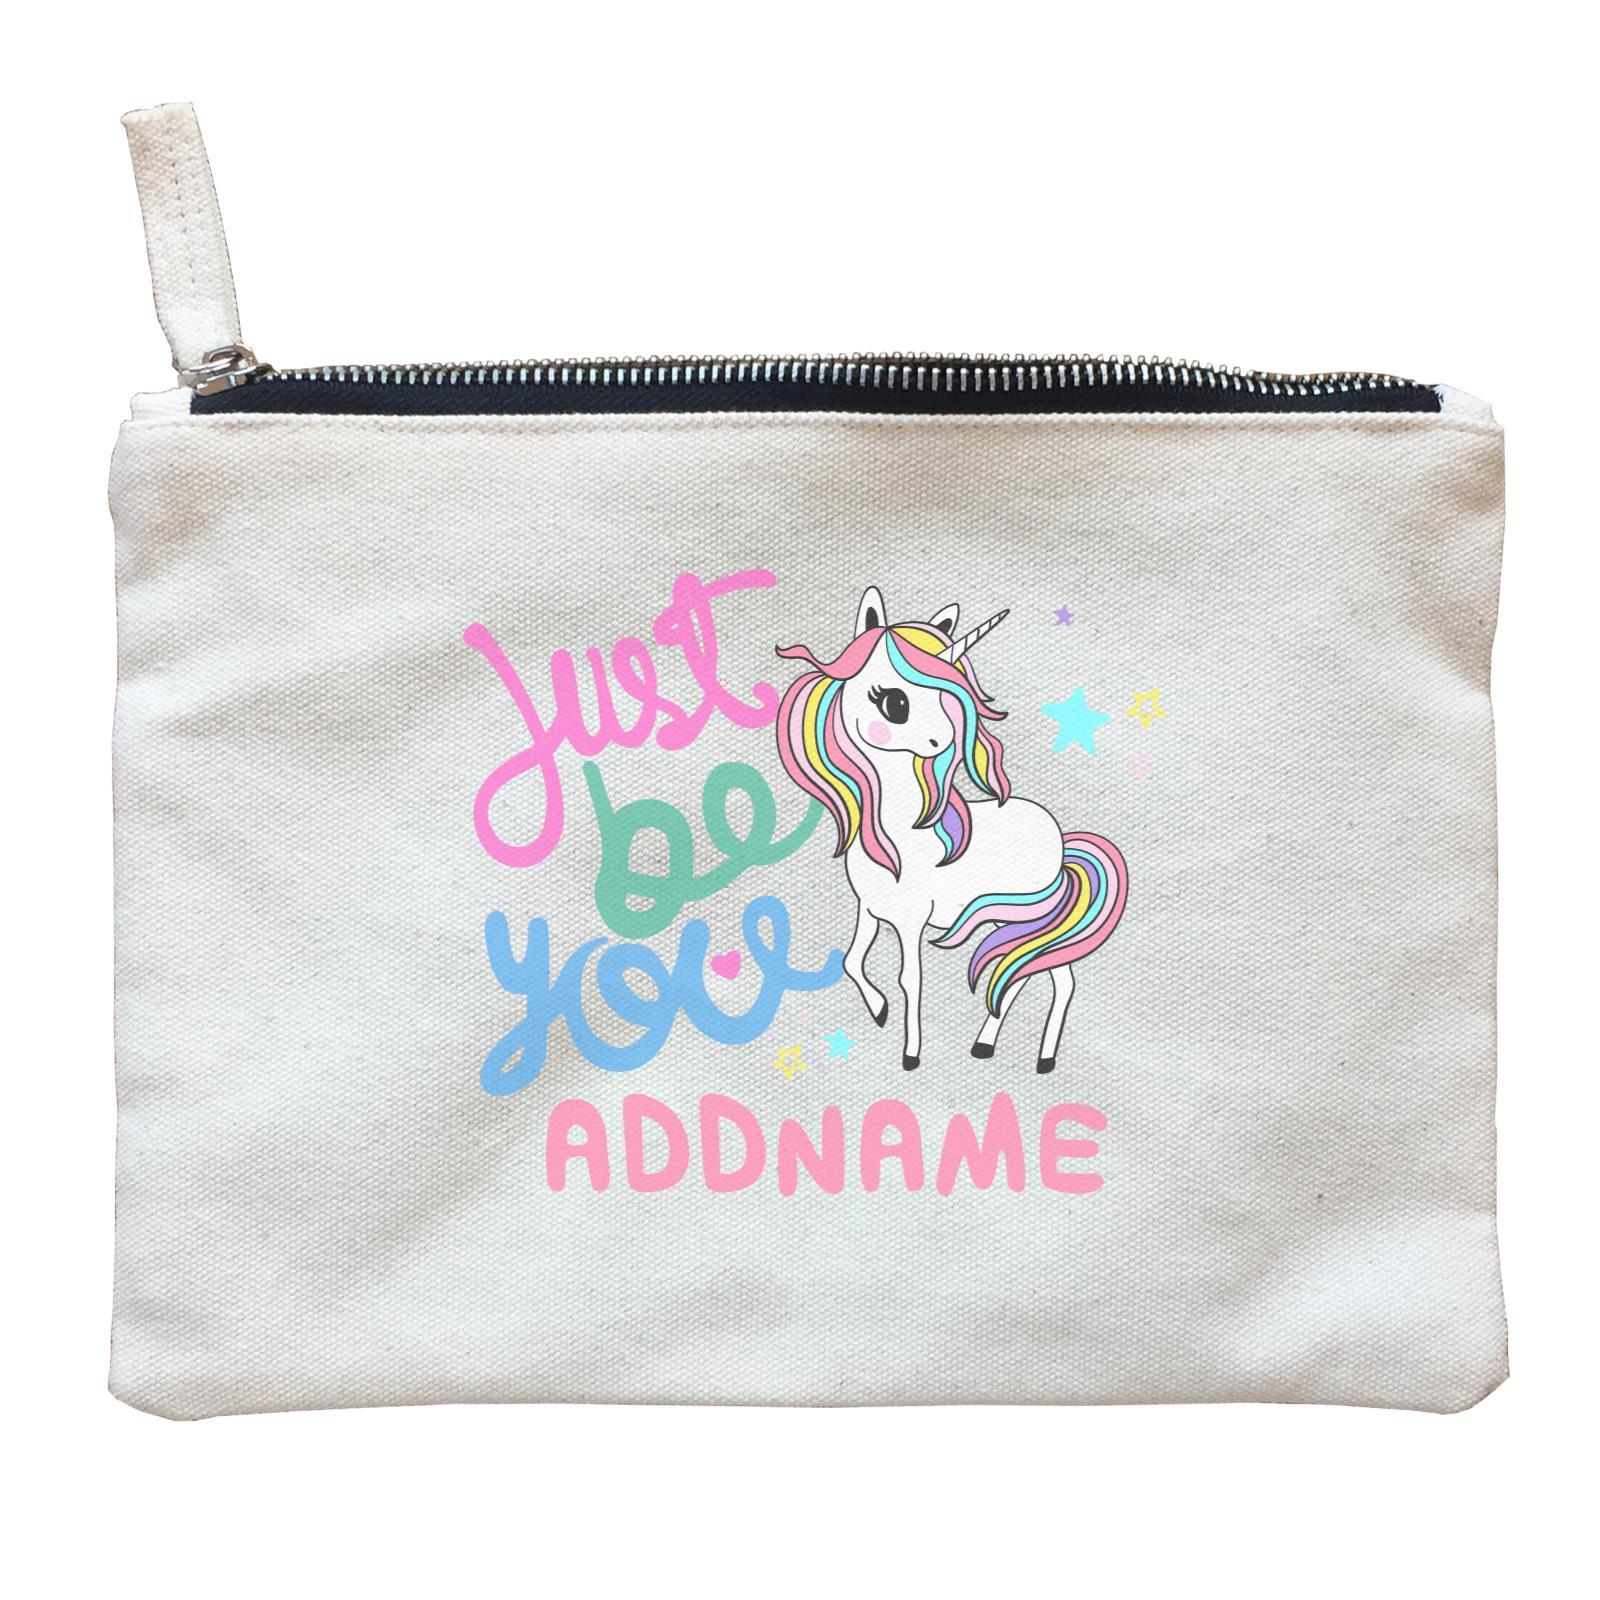 Children's Day Gift Series Just Be You Cute Unicorn Addname  Zipper Pouch